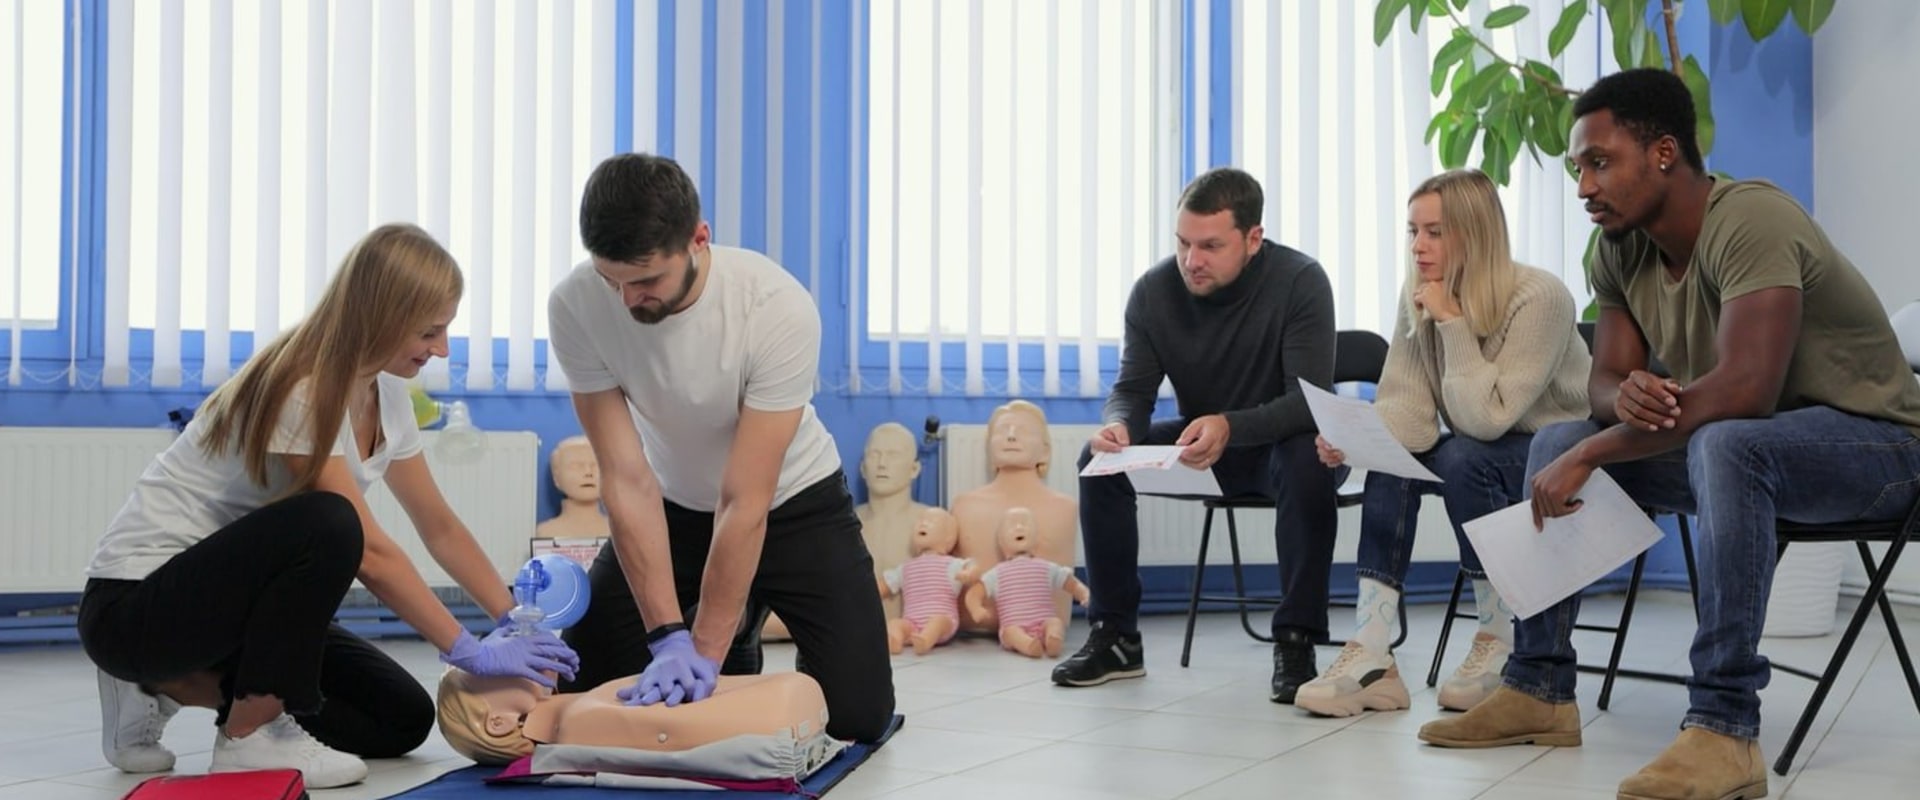 The Benefits Of Emergency First Aid Training In The Field Of Physical Therapy: Saving Lives In Liverpool